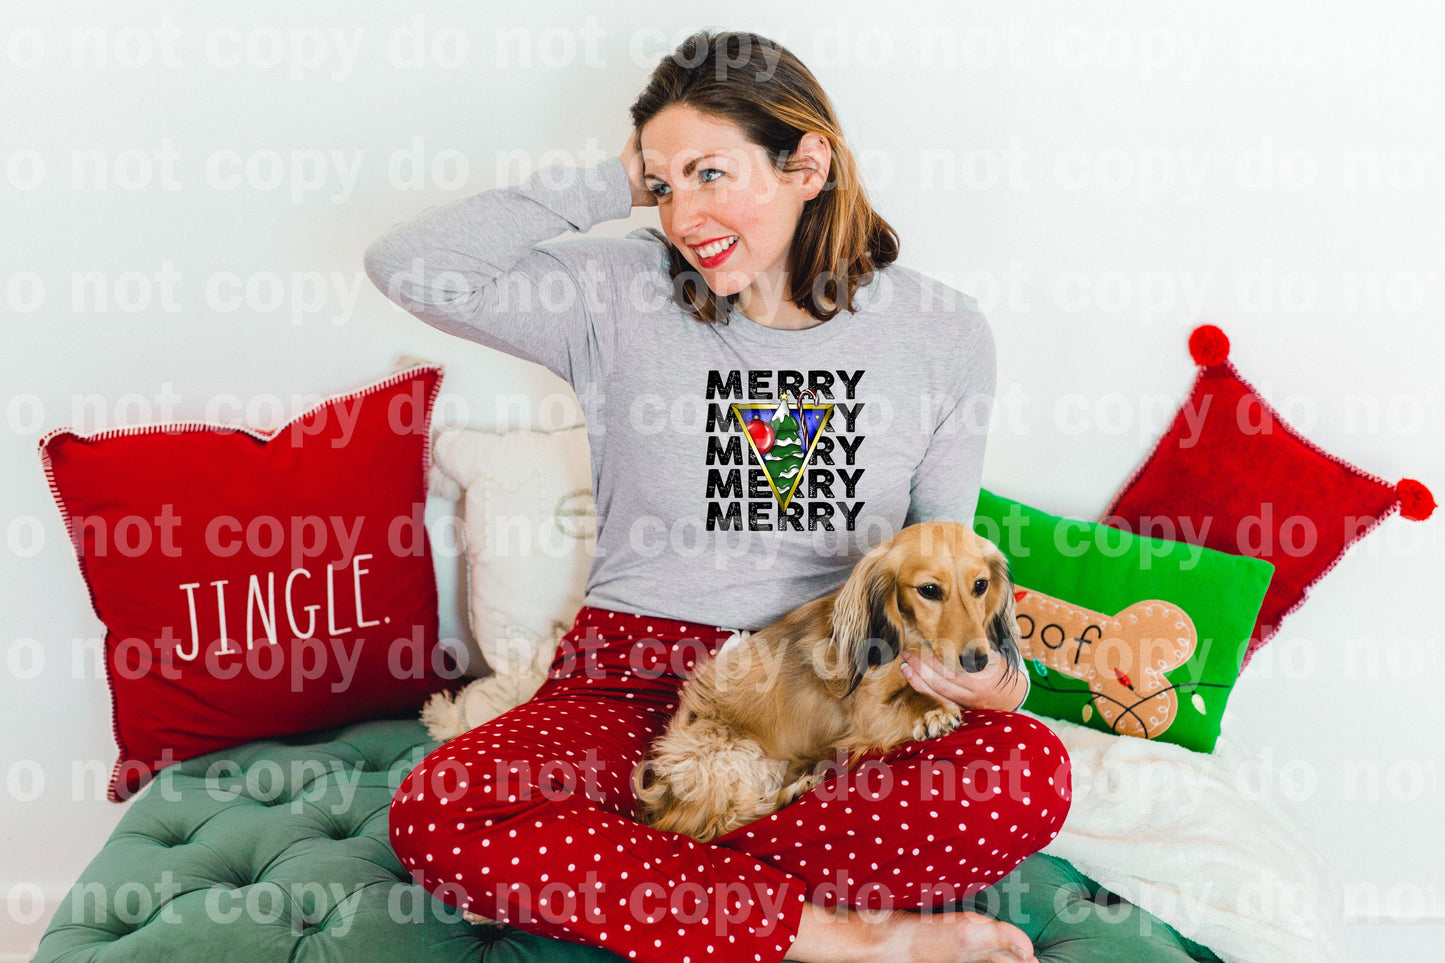 Merry Christmas Tree Dream Print or Sublimation Print